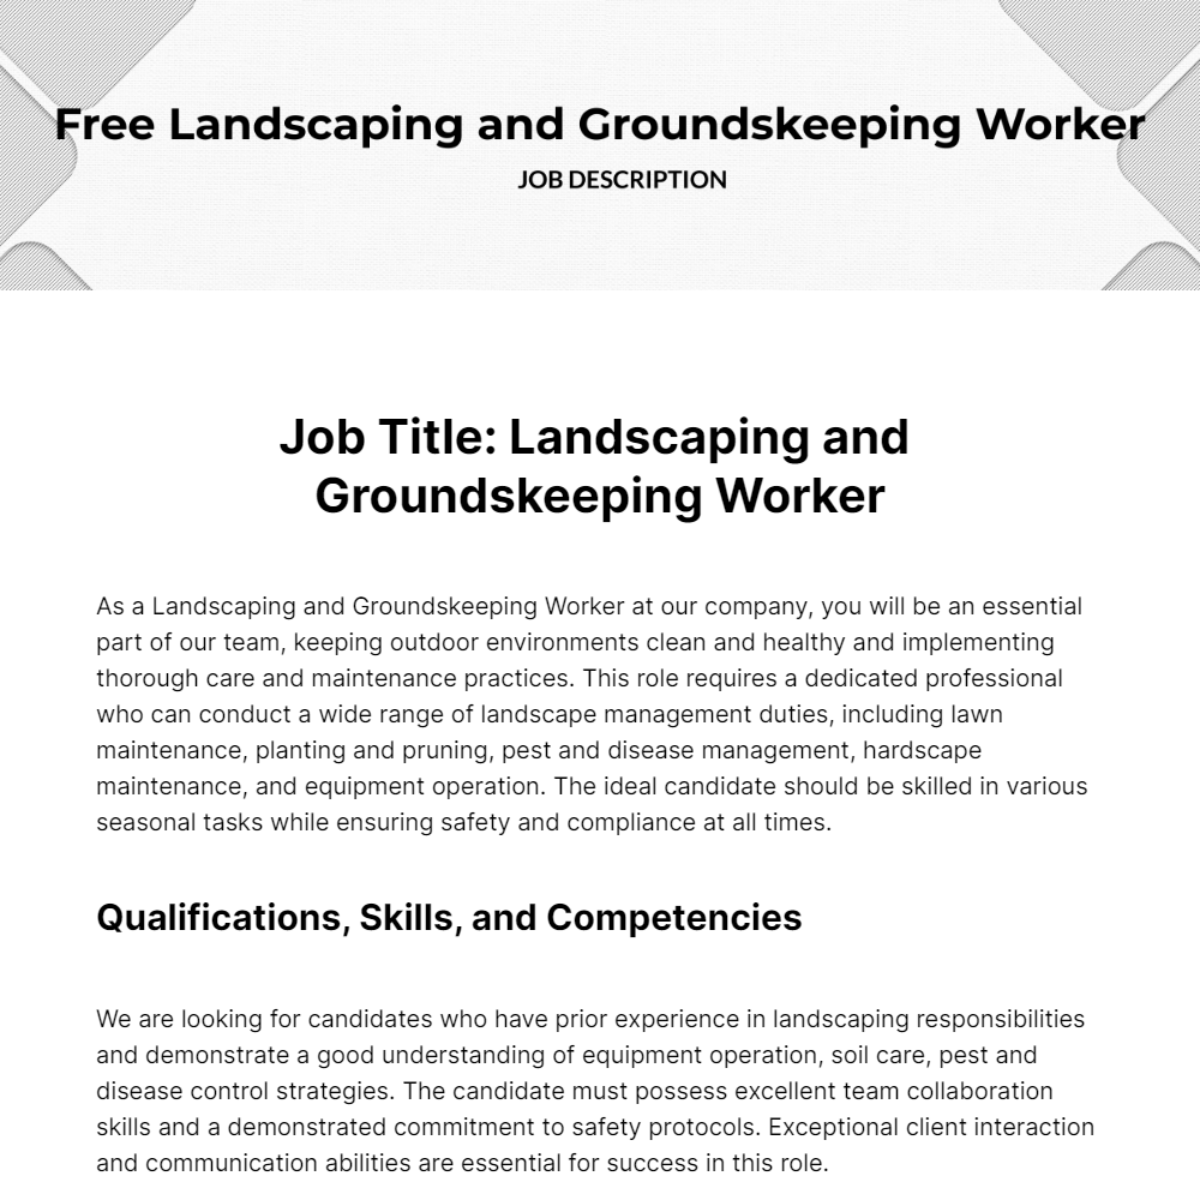 Free Landscaping and Groundskeeping Workers Job Description Template